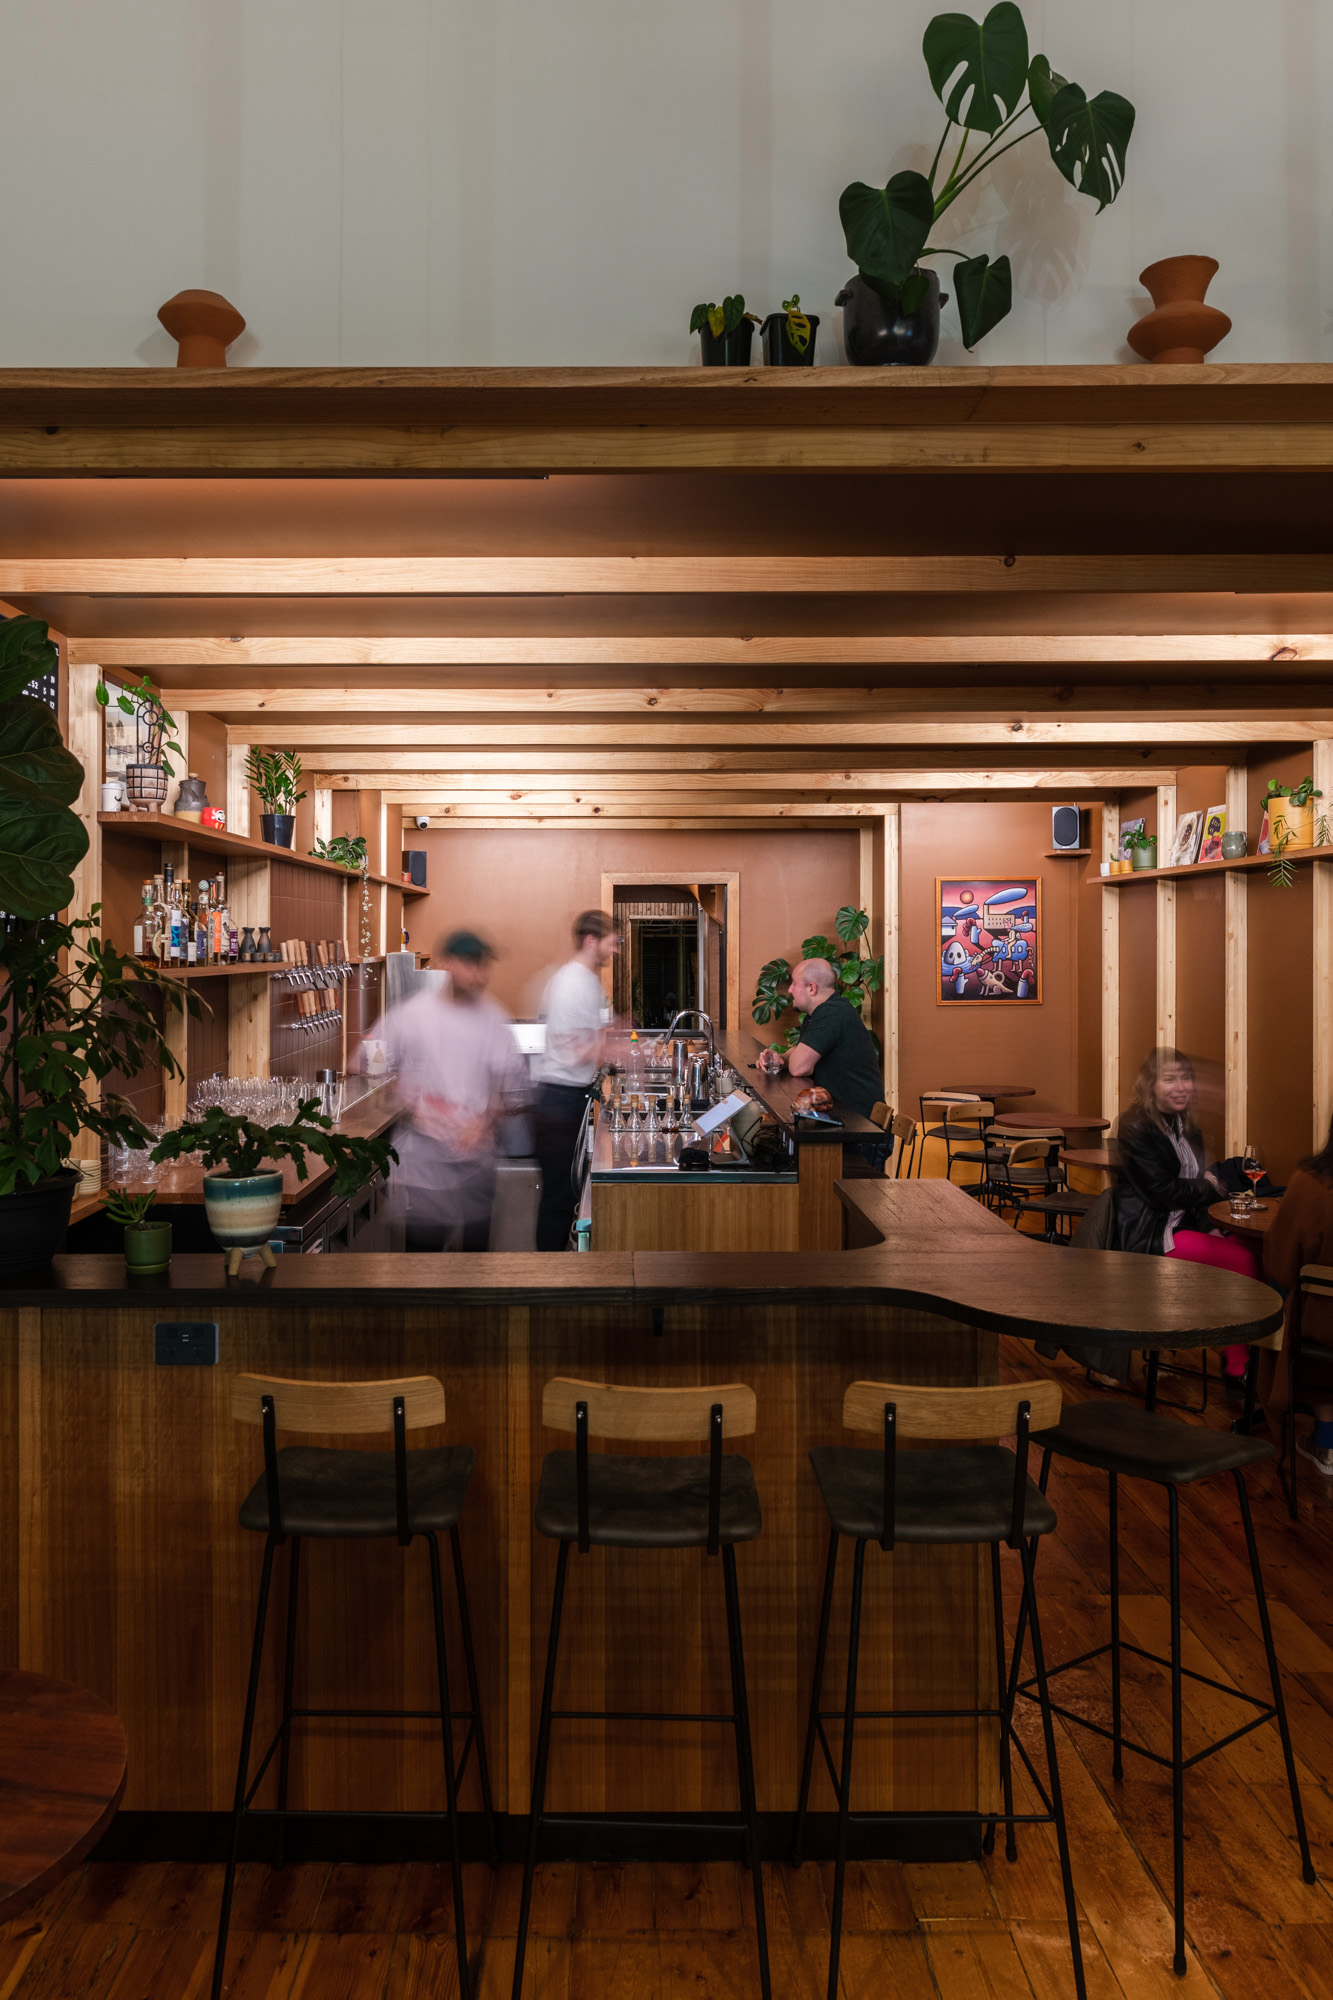 Good Measure is a Carlton café that turns into a bar on weekends